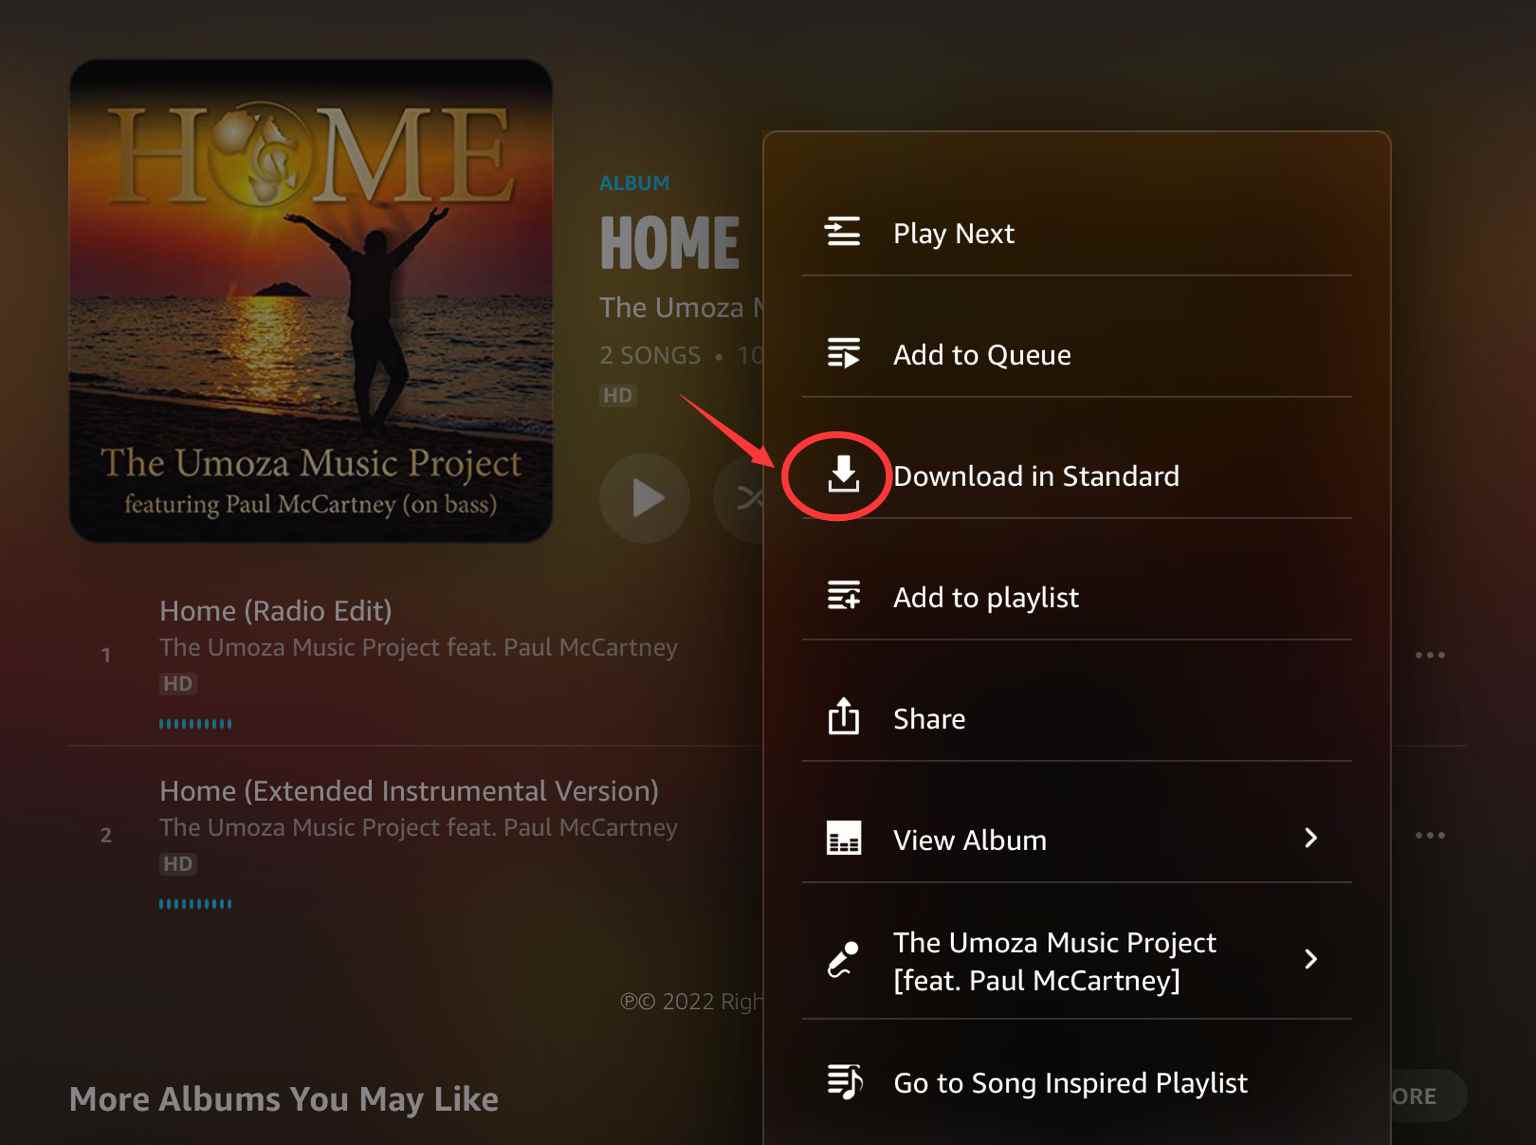 Downloading Amazon Music to Your iPhone